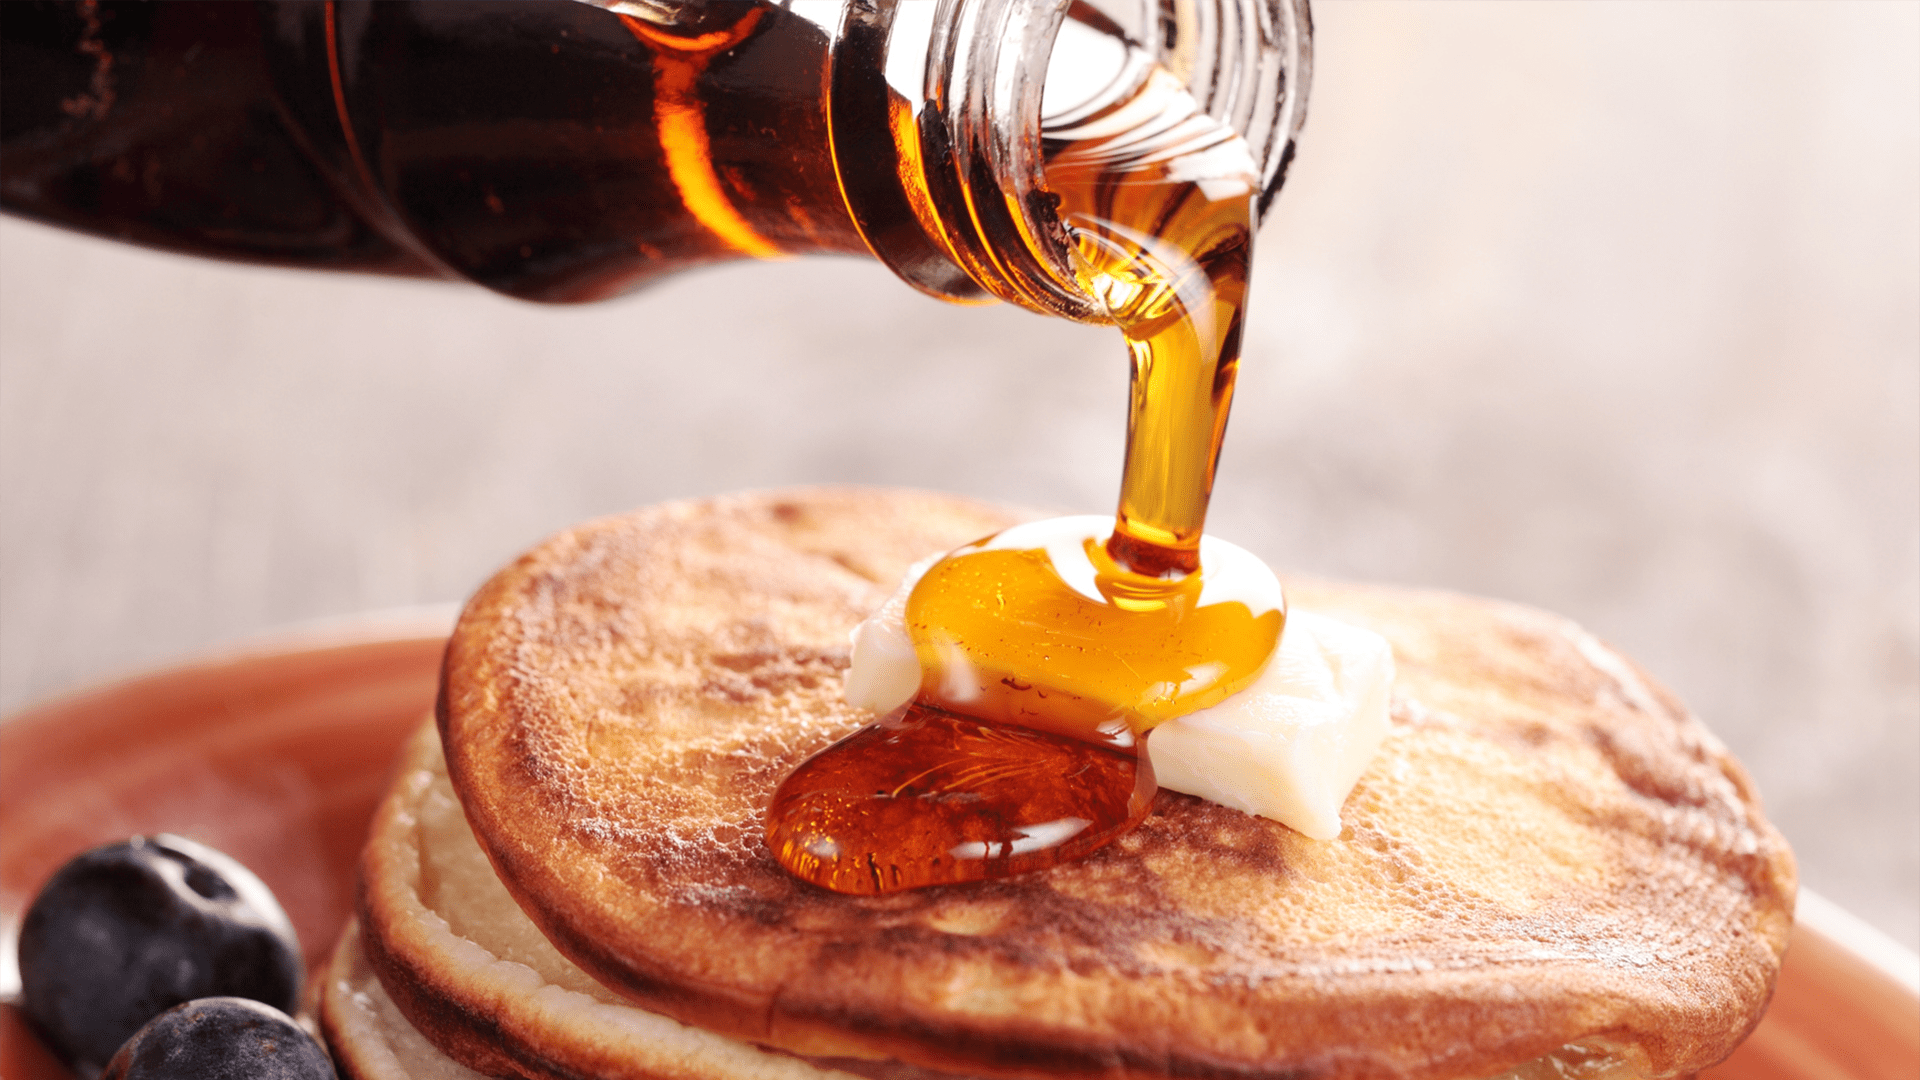 How is syrup made?